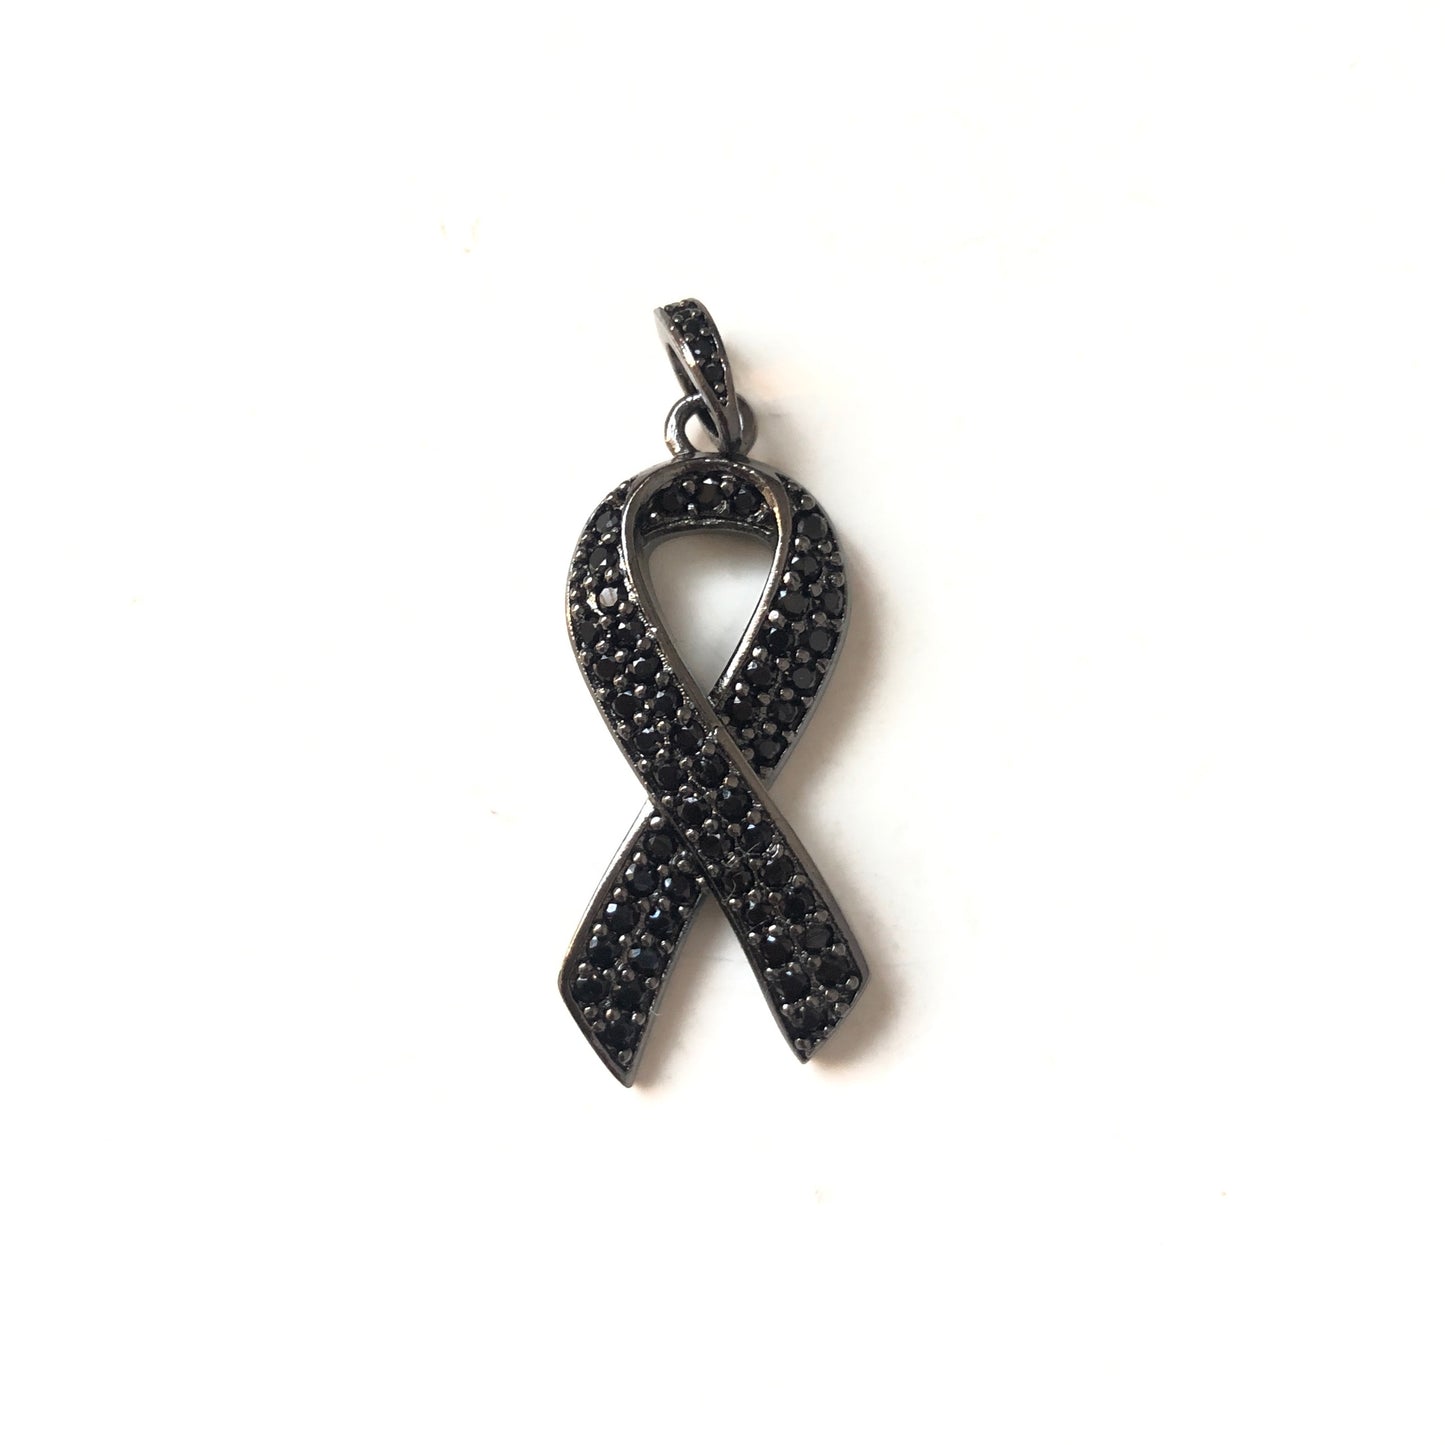 10pcs/lot 27*13mm CZ Paved Pink Ribbon Breast Cancer Awareness Charms Black on Black CZ Paved Charms Breast Cancer Awareness Charms Beads Beyond